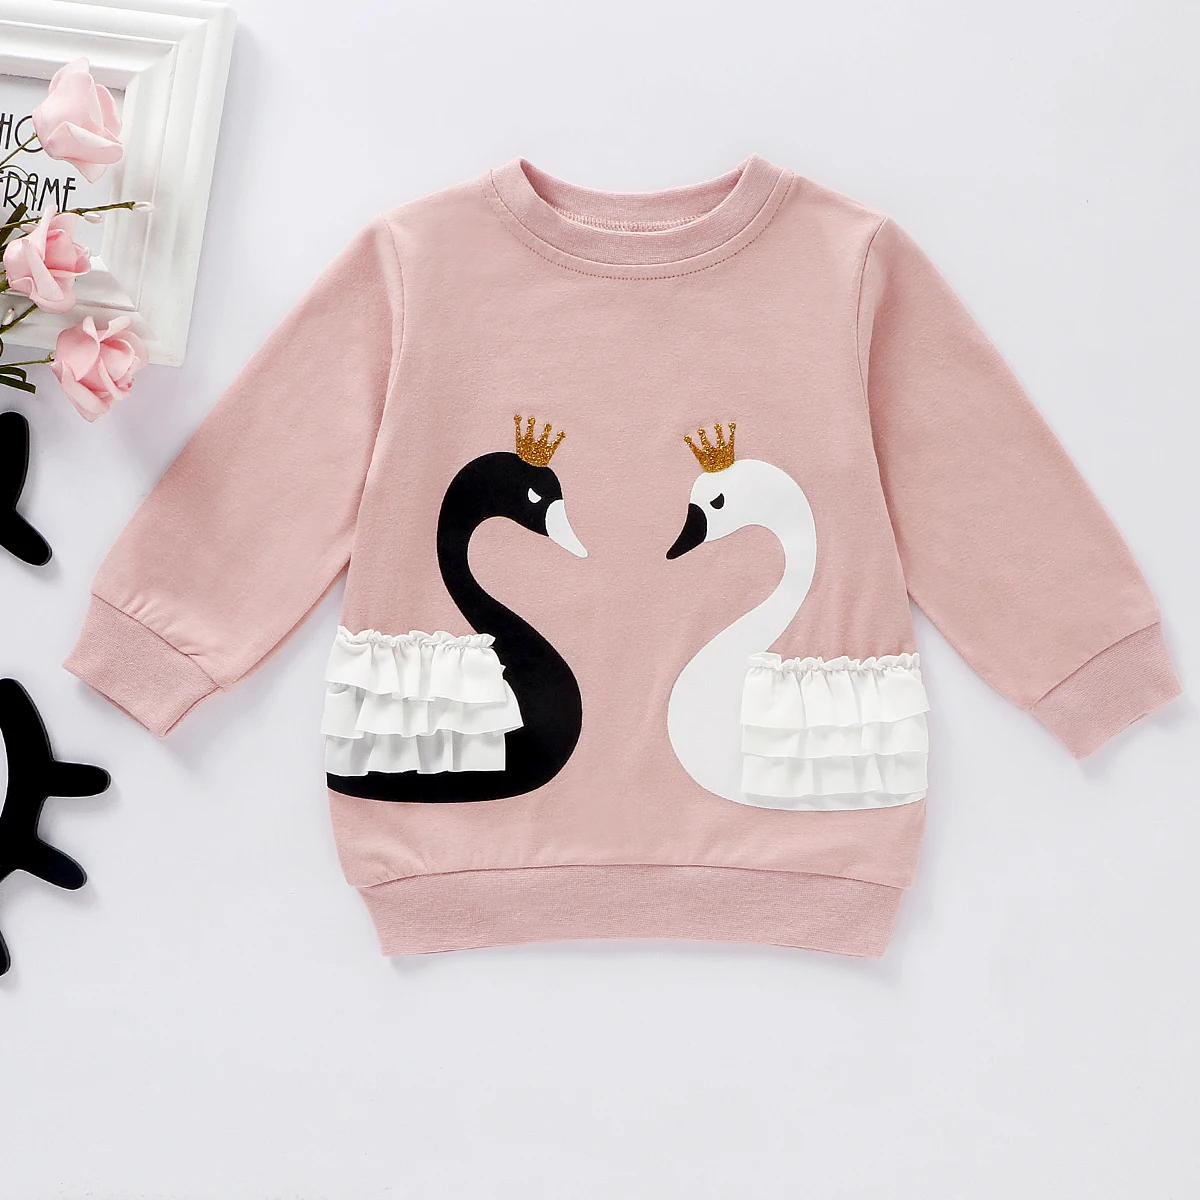 PatPat 2021 New Spring and Autumn Baby Soft Swan Print Long Sleeve Top for and Striped Pants Set Toddler Girl